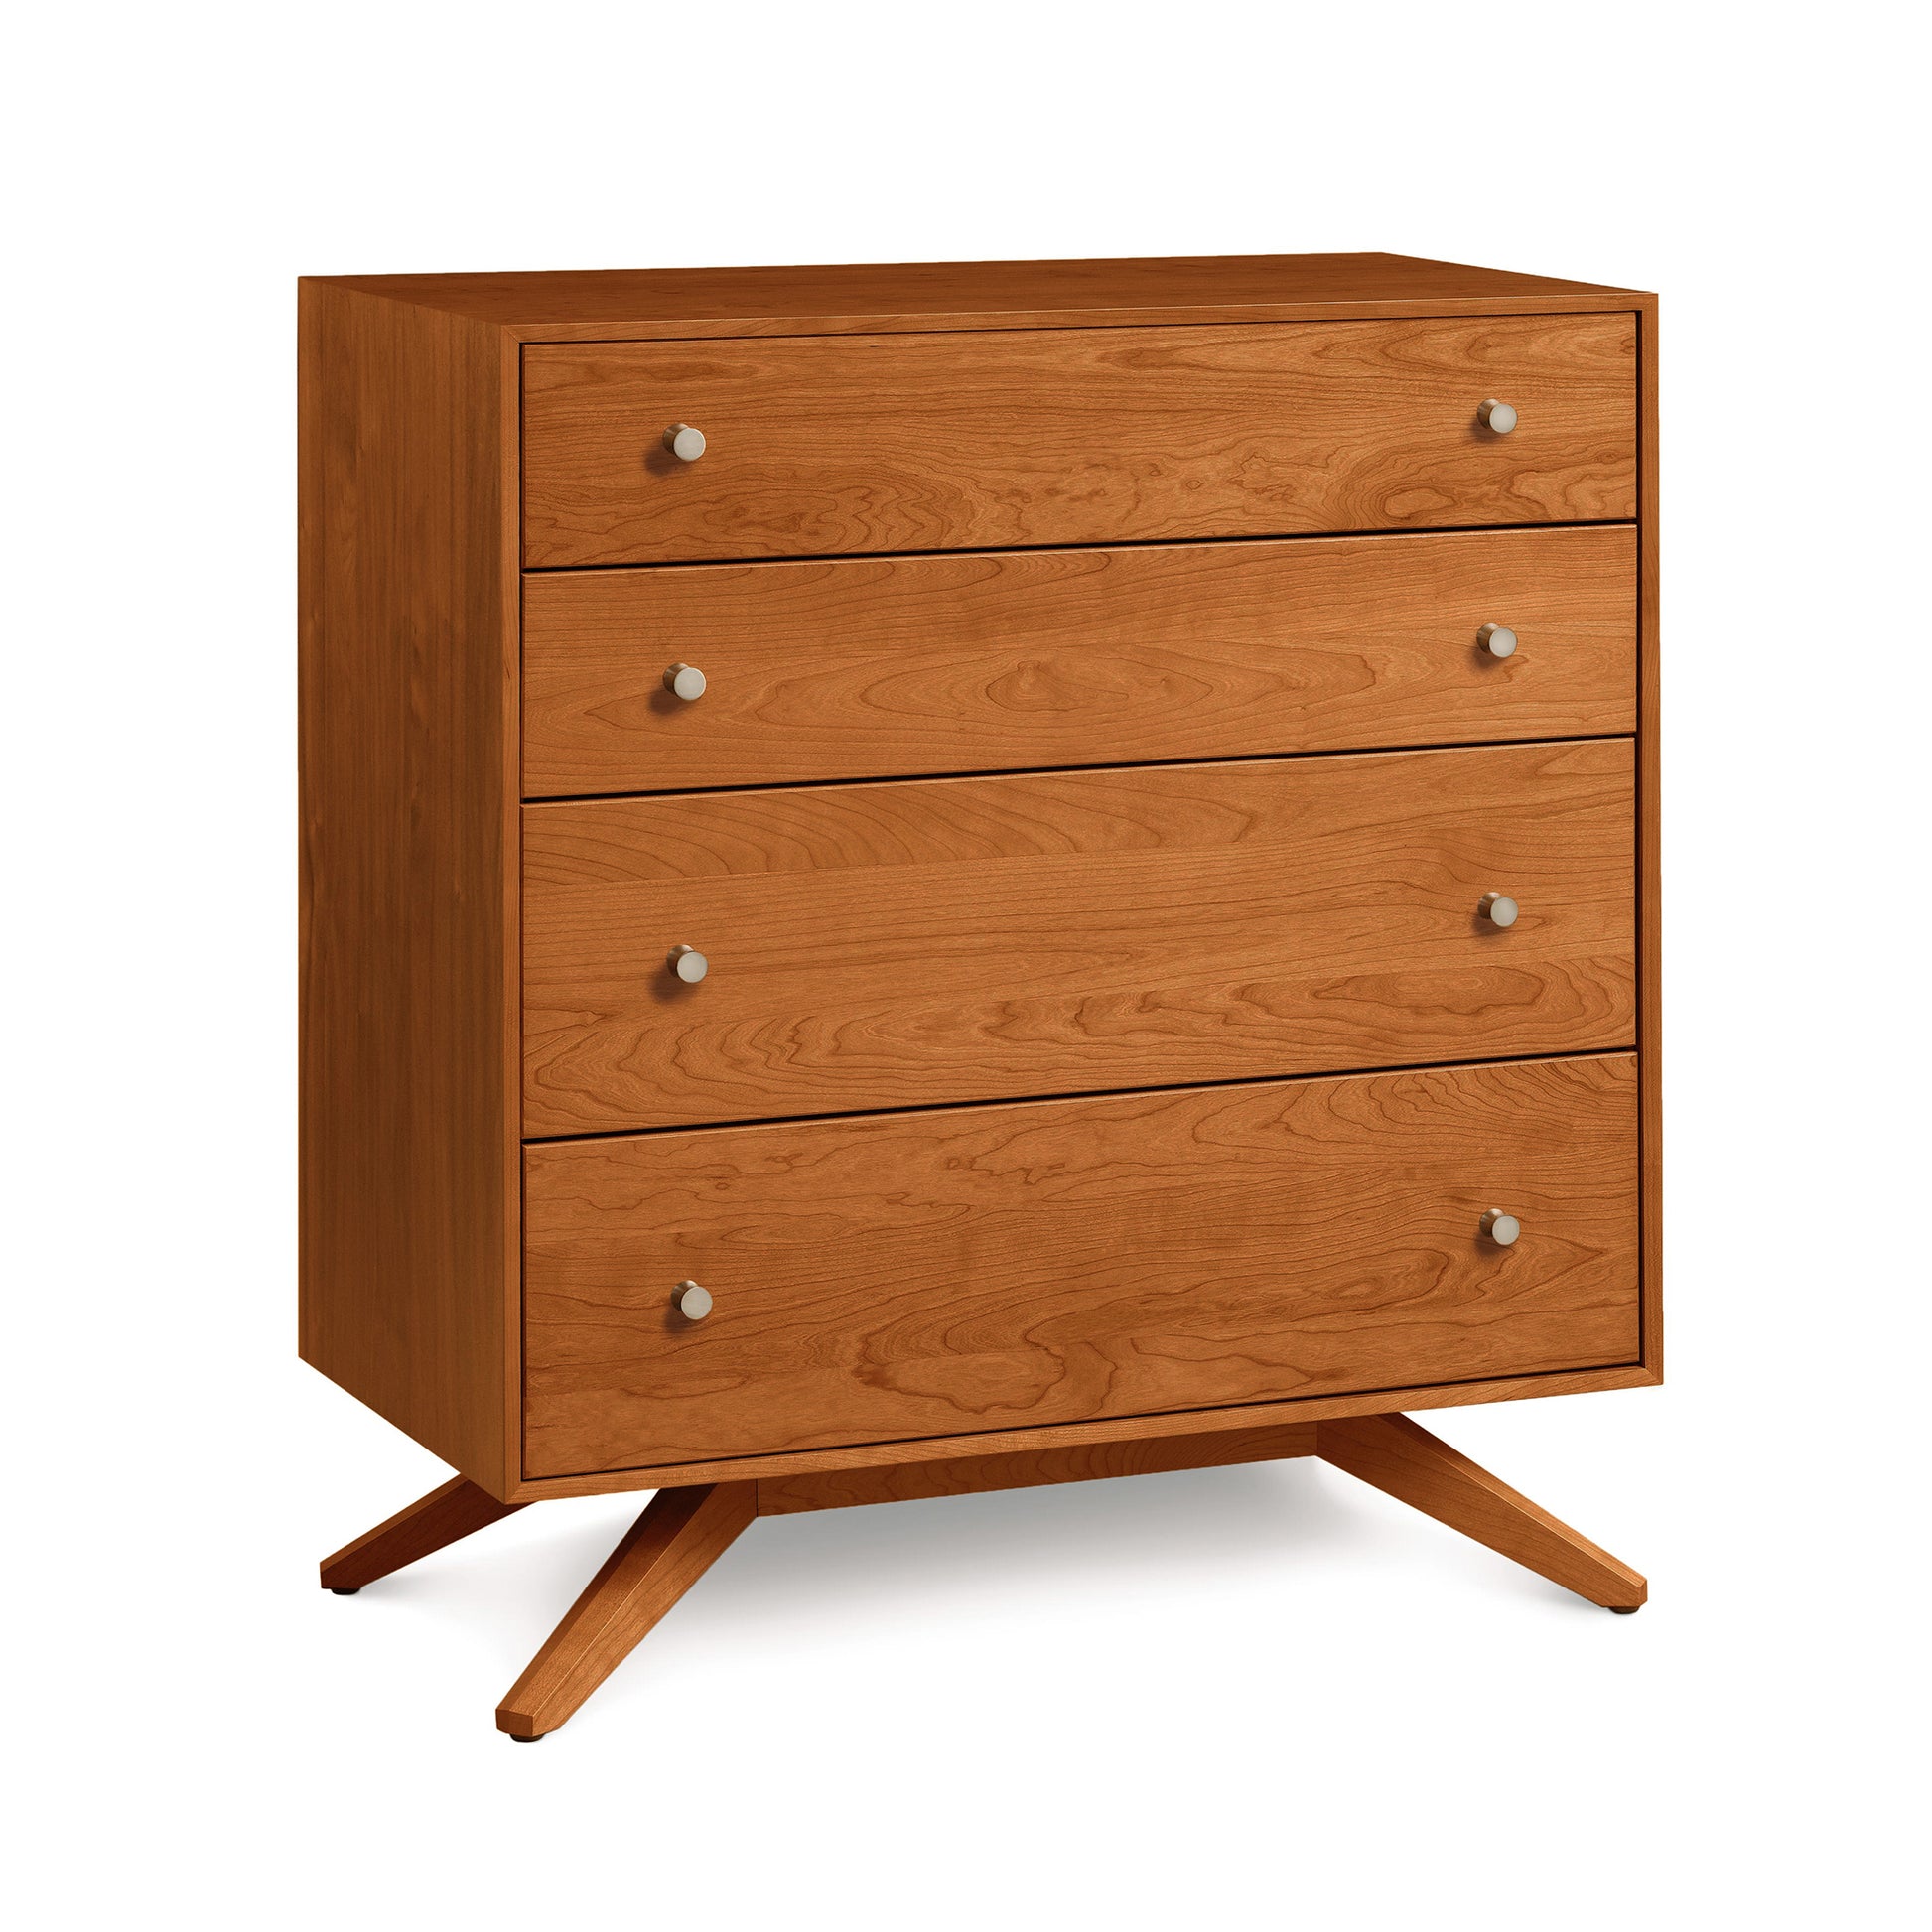 A hardwood Copeland Furniture Astrid 4-Drawer Chest with splayed legs isolated on a white background.